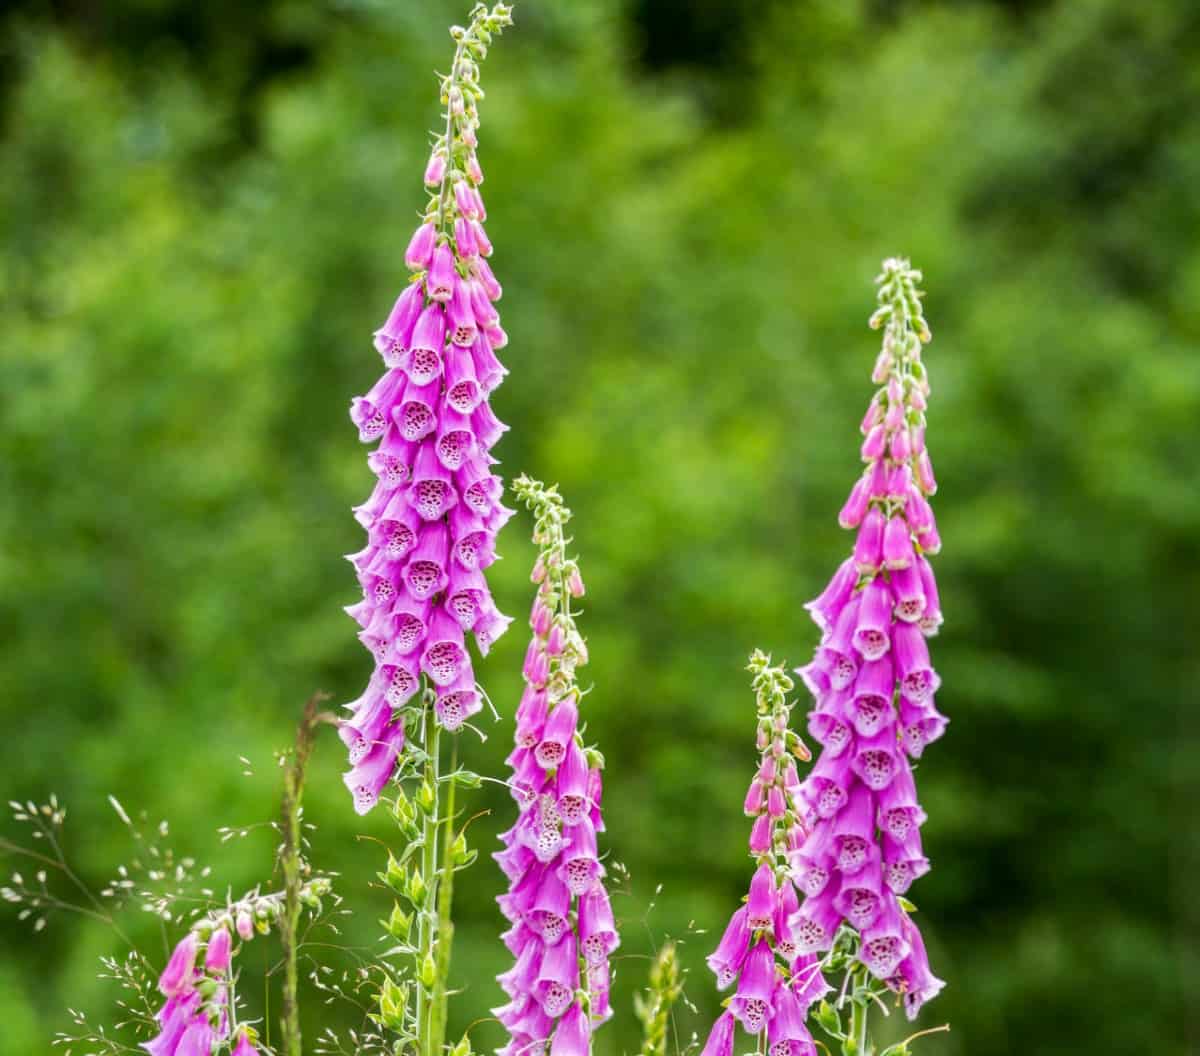 Foxglove is dangerous for pets and humans.